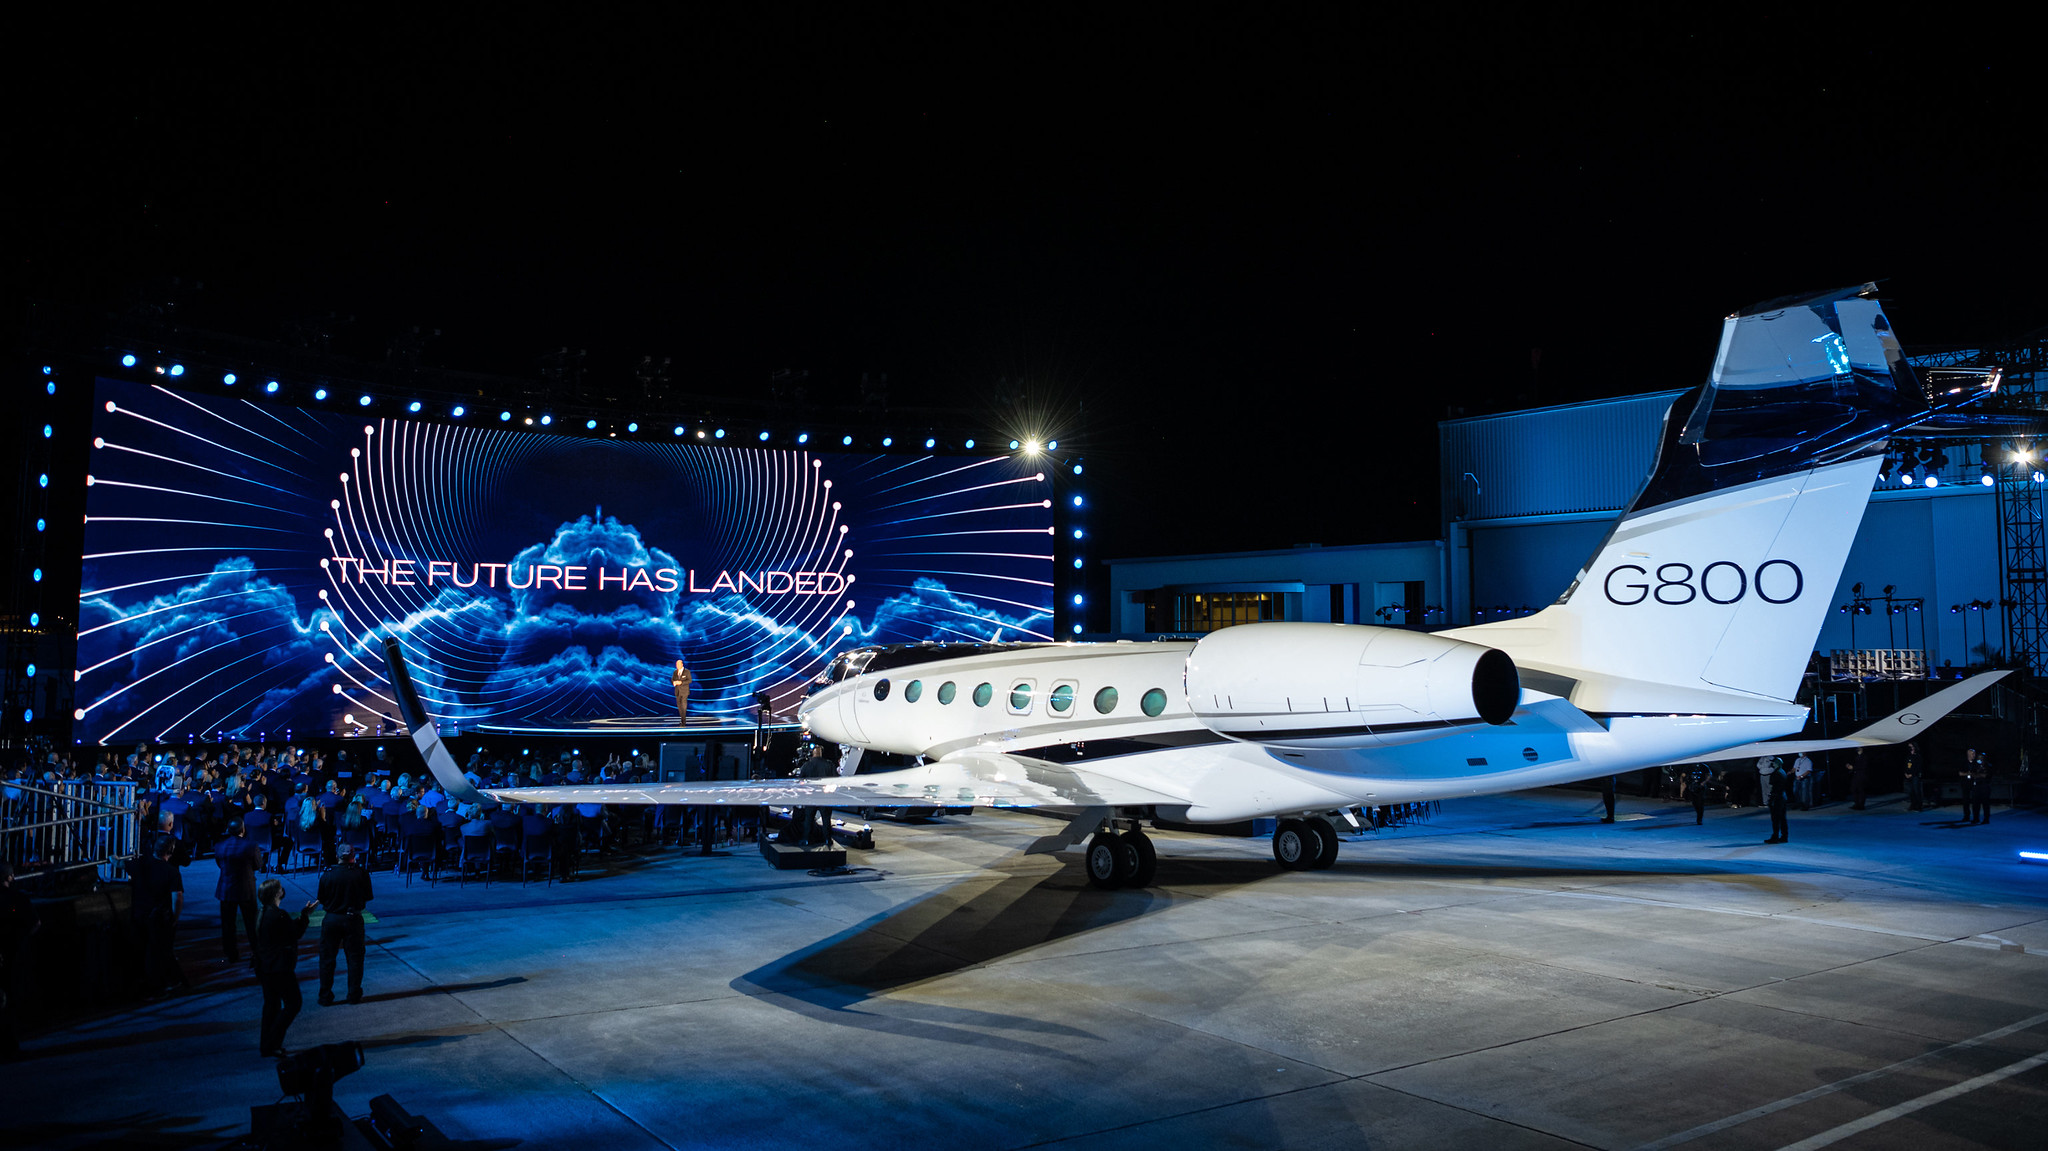 On October 4 2021, Gulfstream Aerospace Corp. introduced two all-new aircraft, further expanding its ultramodern, high-technology family of aircraft: the Gulfstream G800 and the Gulfstream G400.